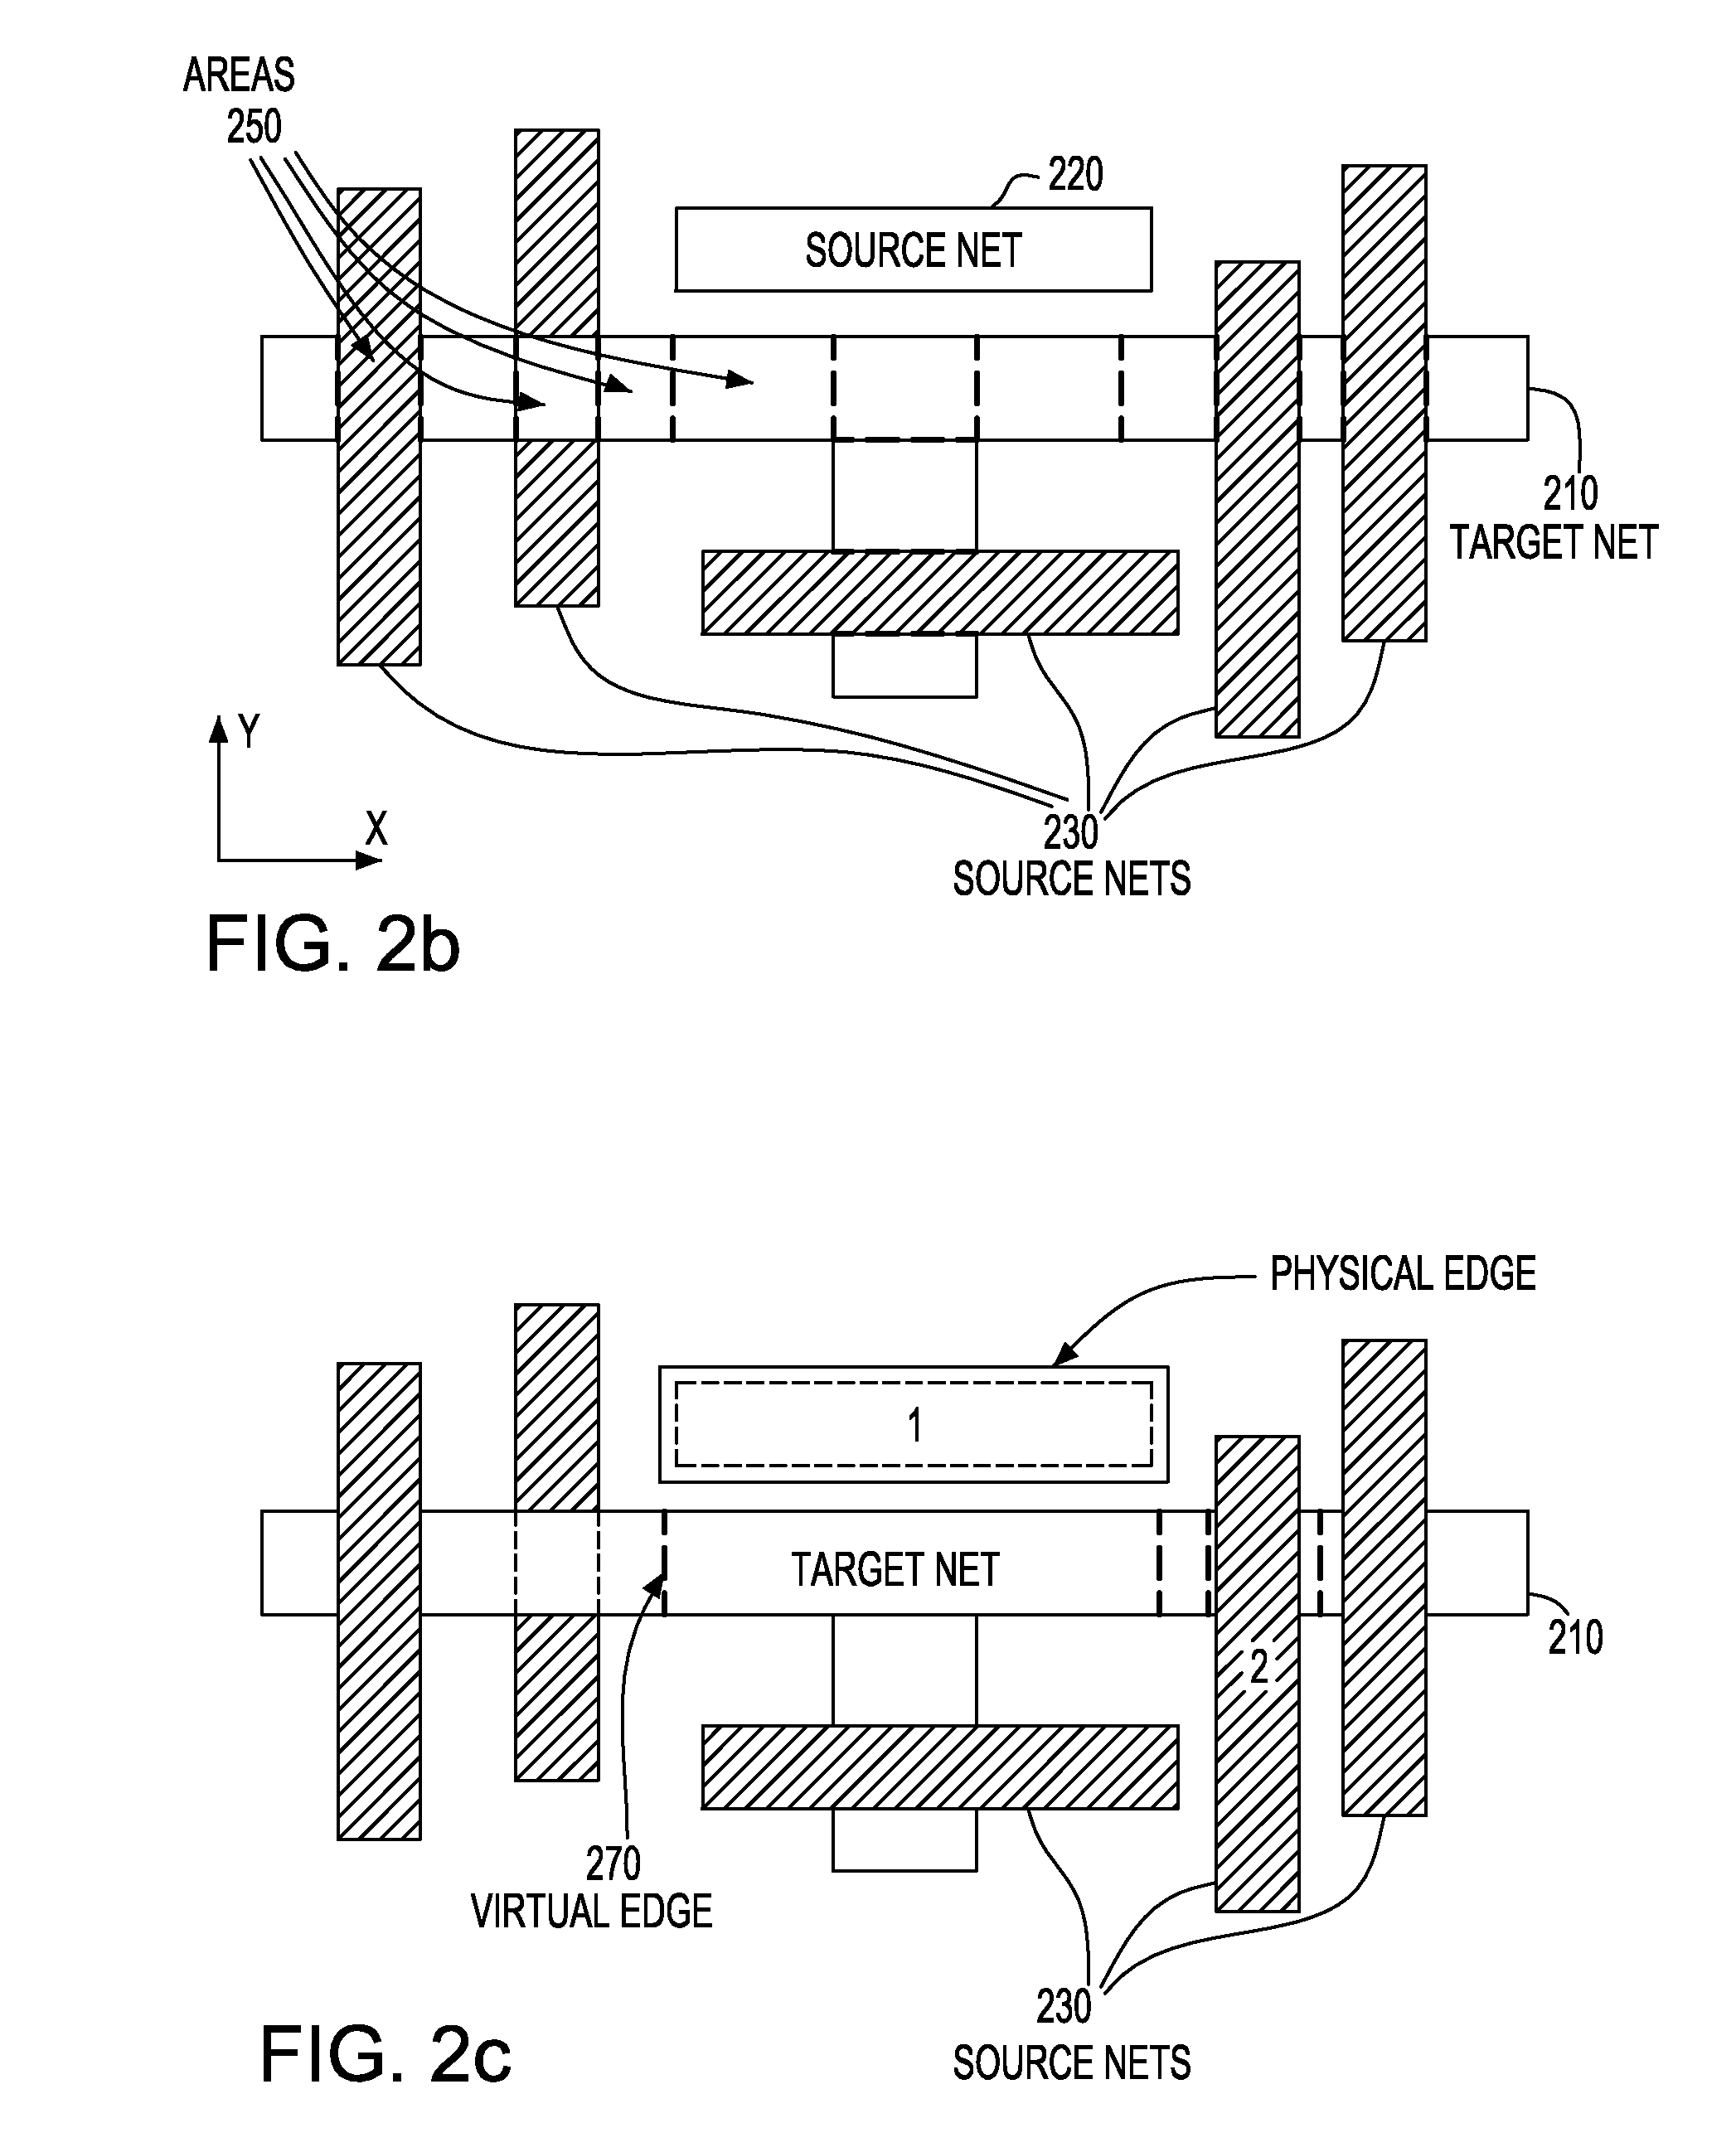 Method for Calculating Capacitance Gradients in VLSI Layouts Using A Shape Processing Engine